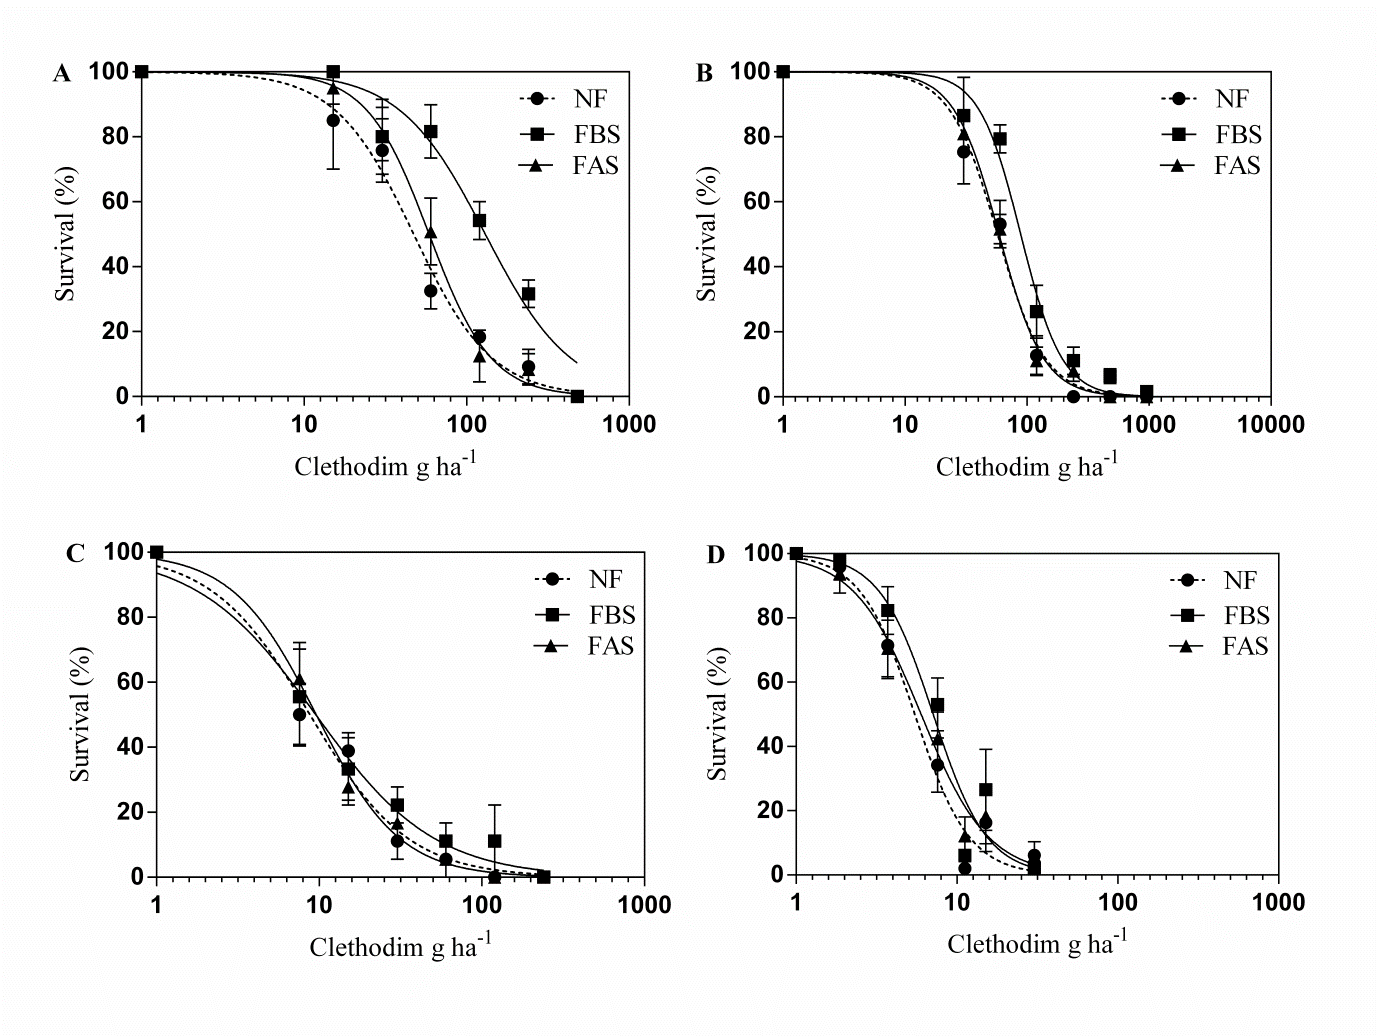 Figure 2. Effect of frost on response to clethodim of three resistant (A, B and C) and one susceptible (D) annual ryegrass populations. Plants were exposed to frost for 3 nights prior to clethodim application (FBS) or 3 nights after clethodim application (FAS) compared with no frost (NF). Some resistant populations became much more resistant with frost. Source: Saini et al. 2016.